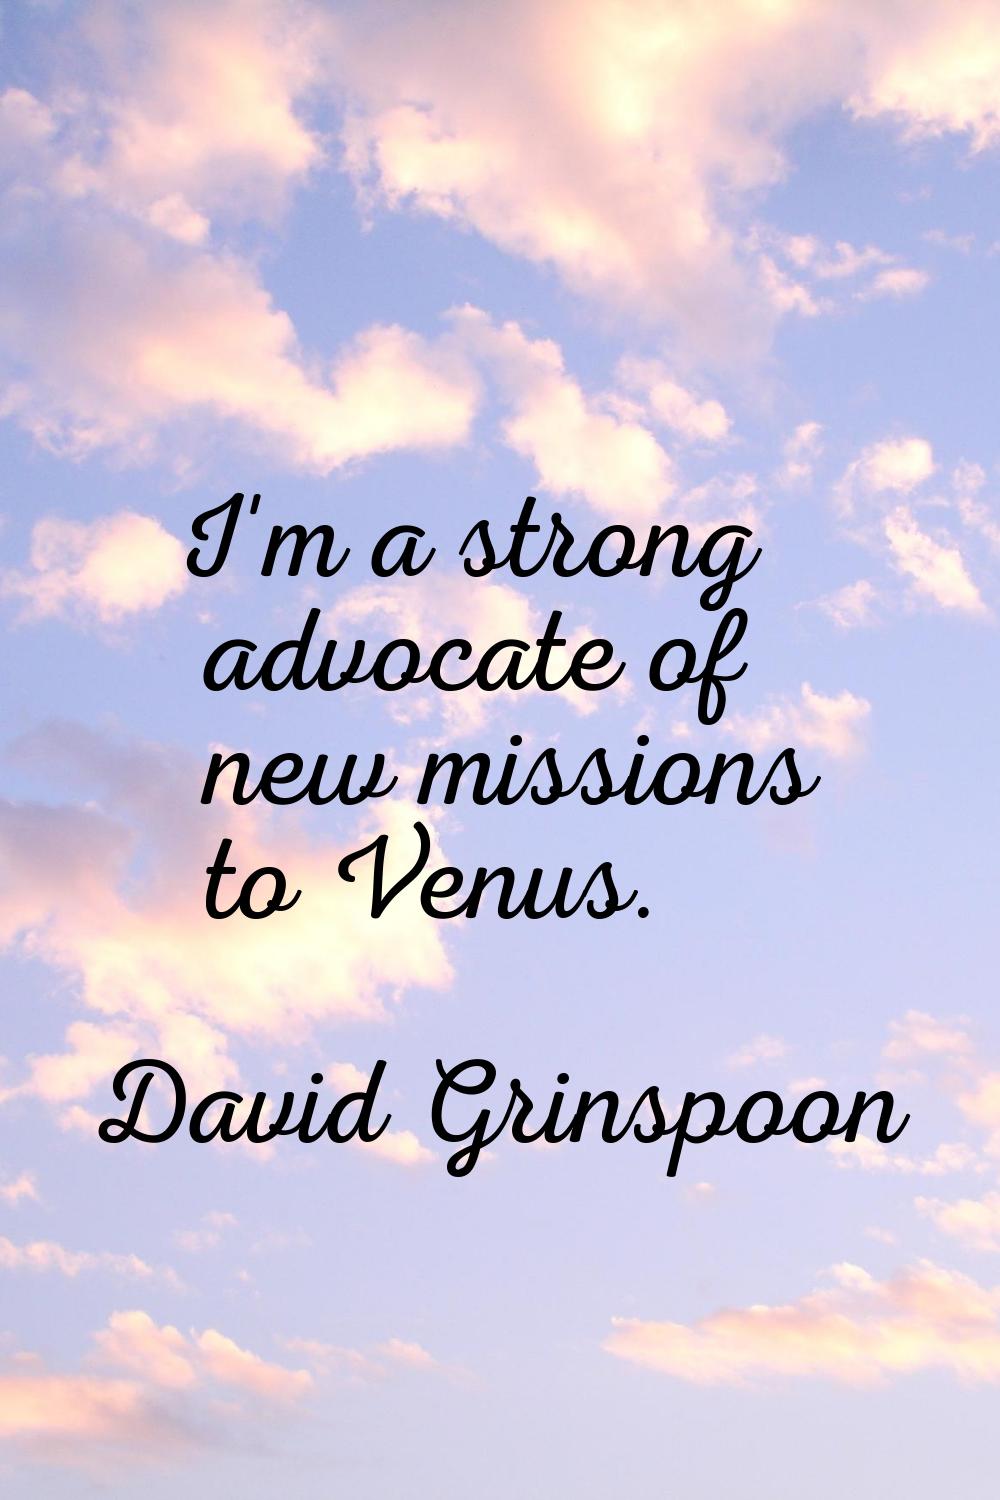 I'm a strong advocate of new missions to Venus.